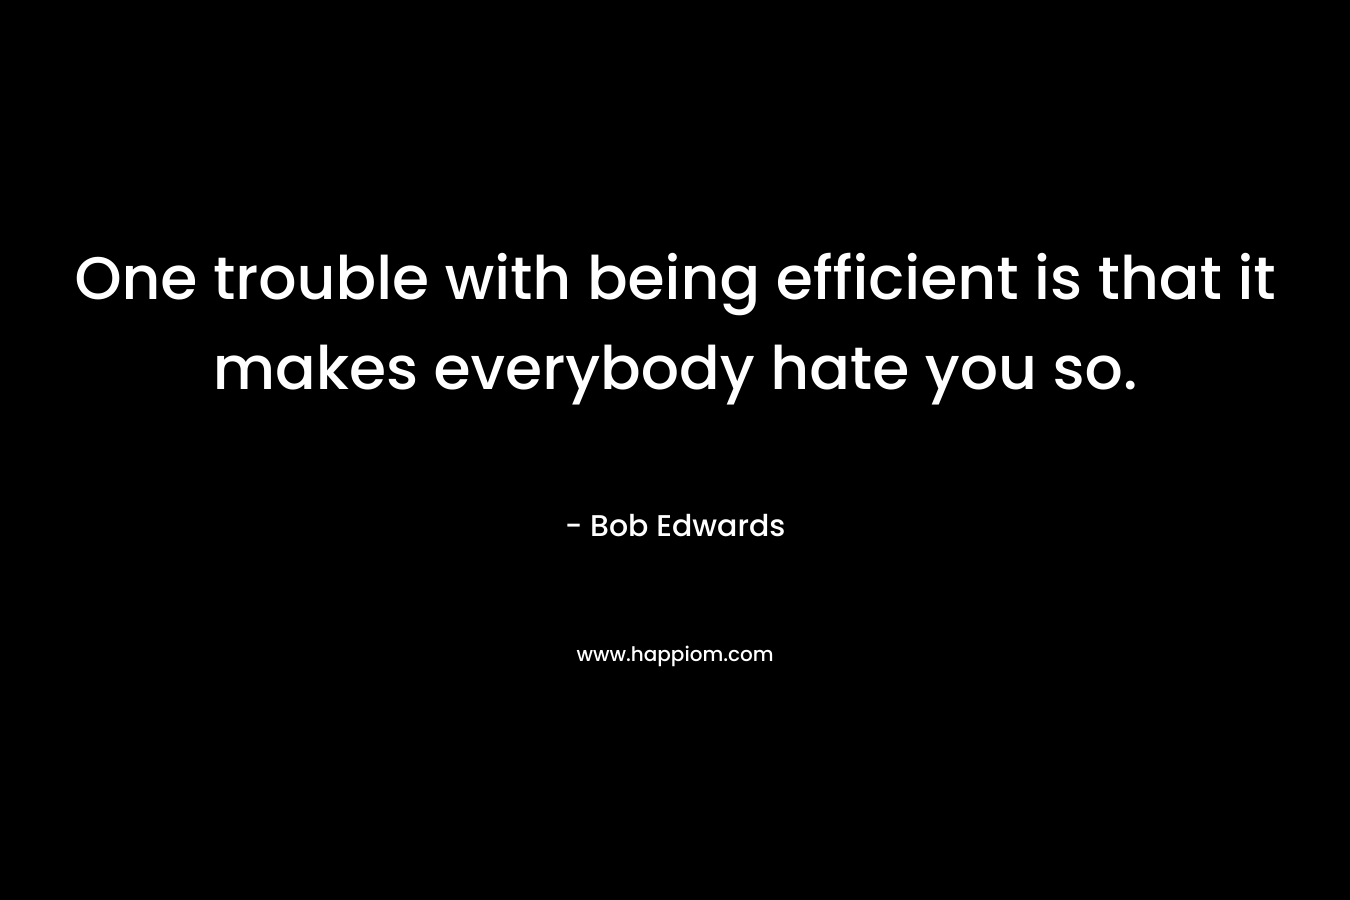 One trouble with being efficient is that it makes everybody hate you so. – Bob Edwards